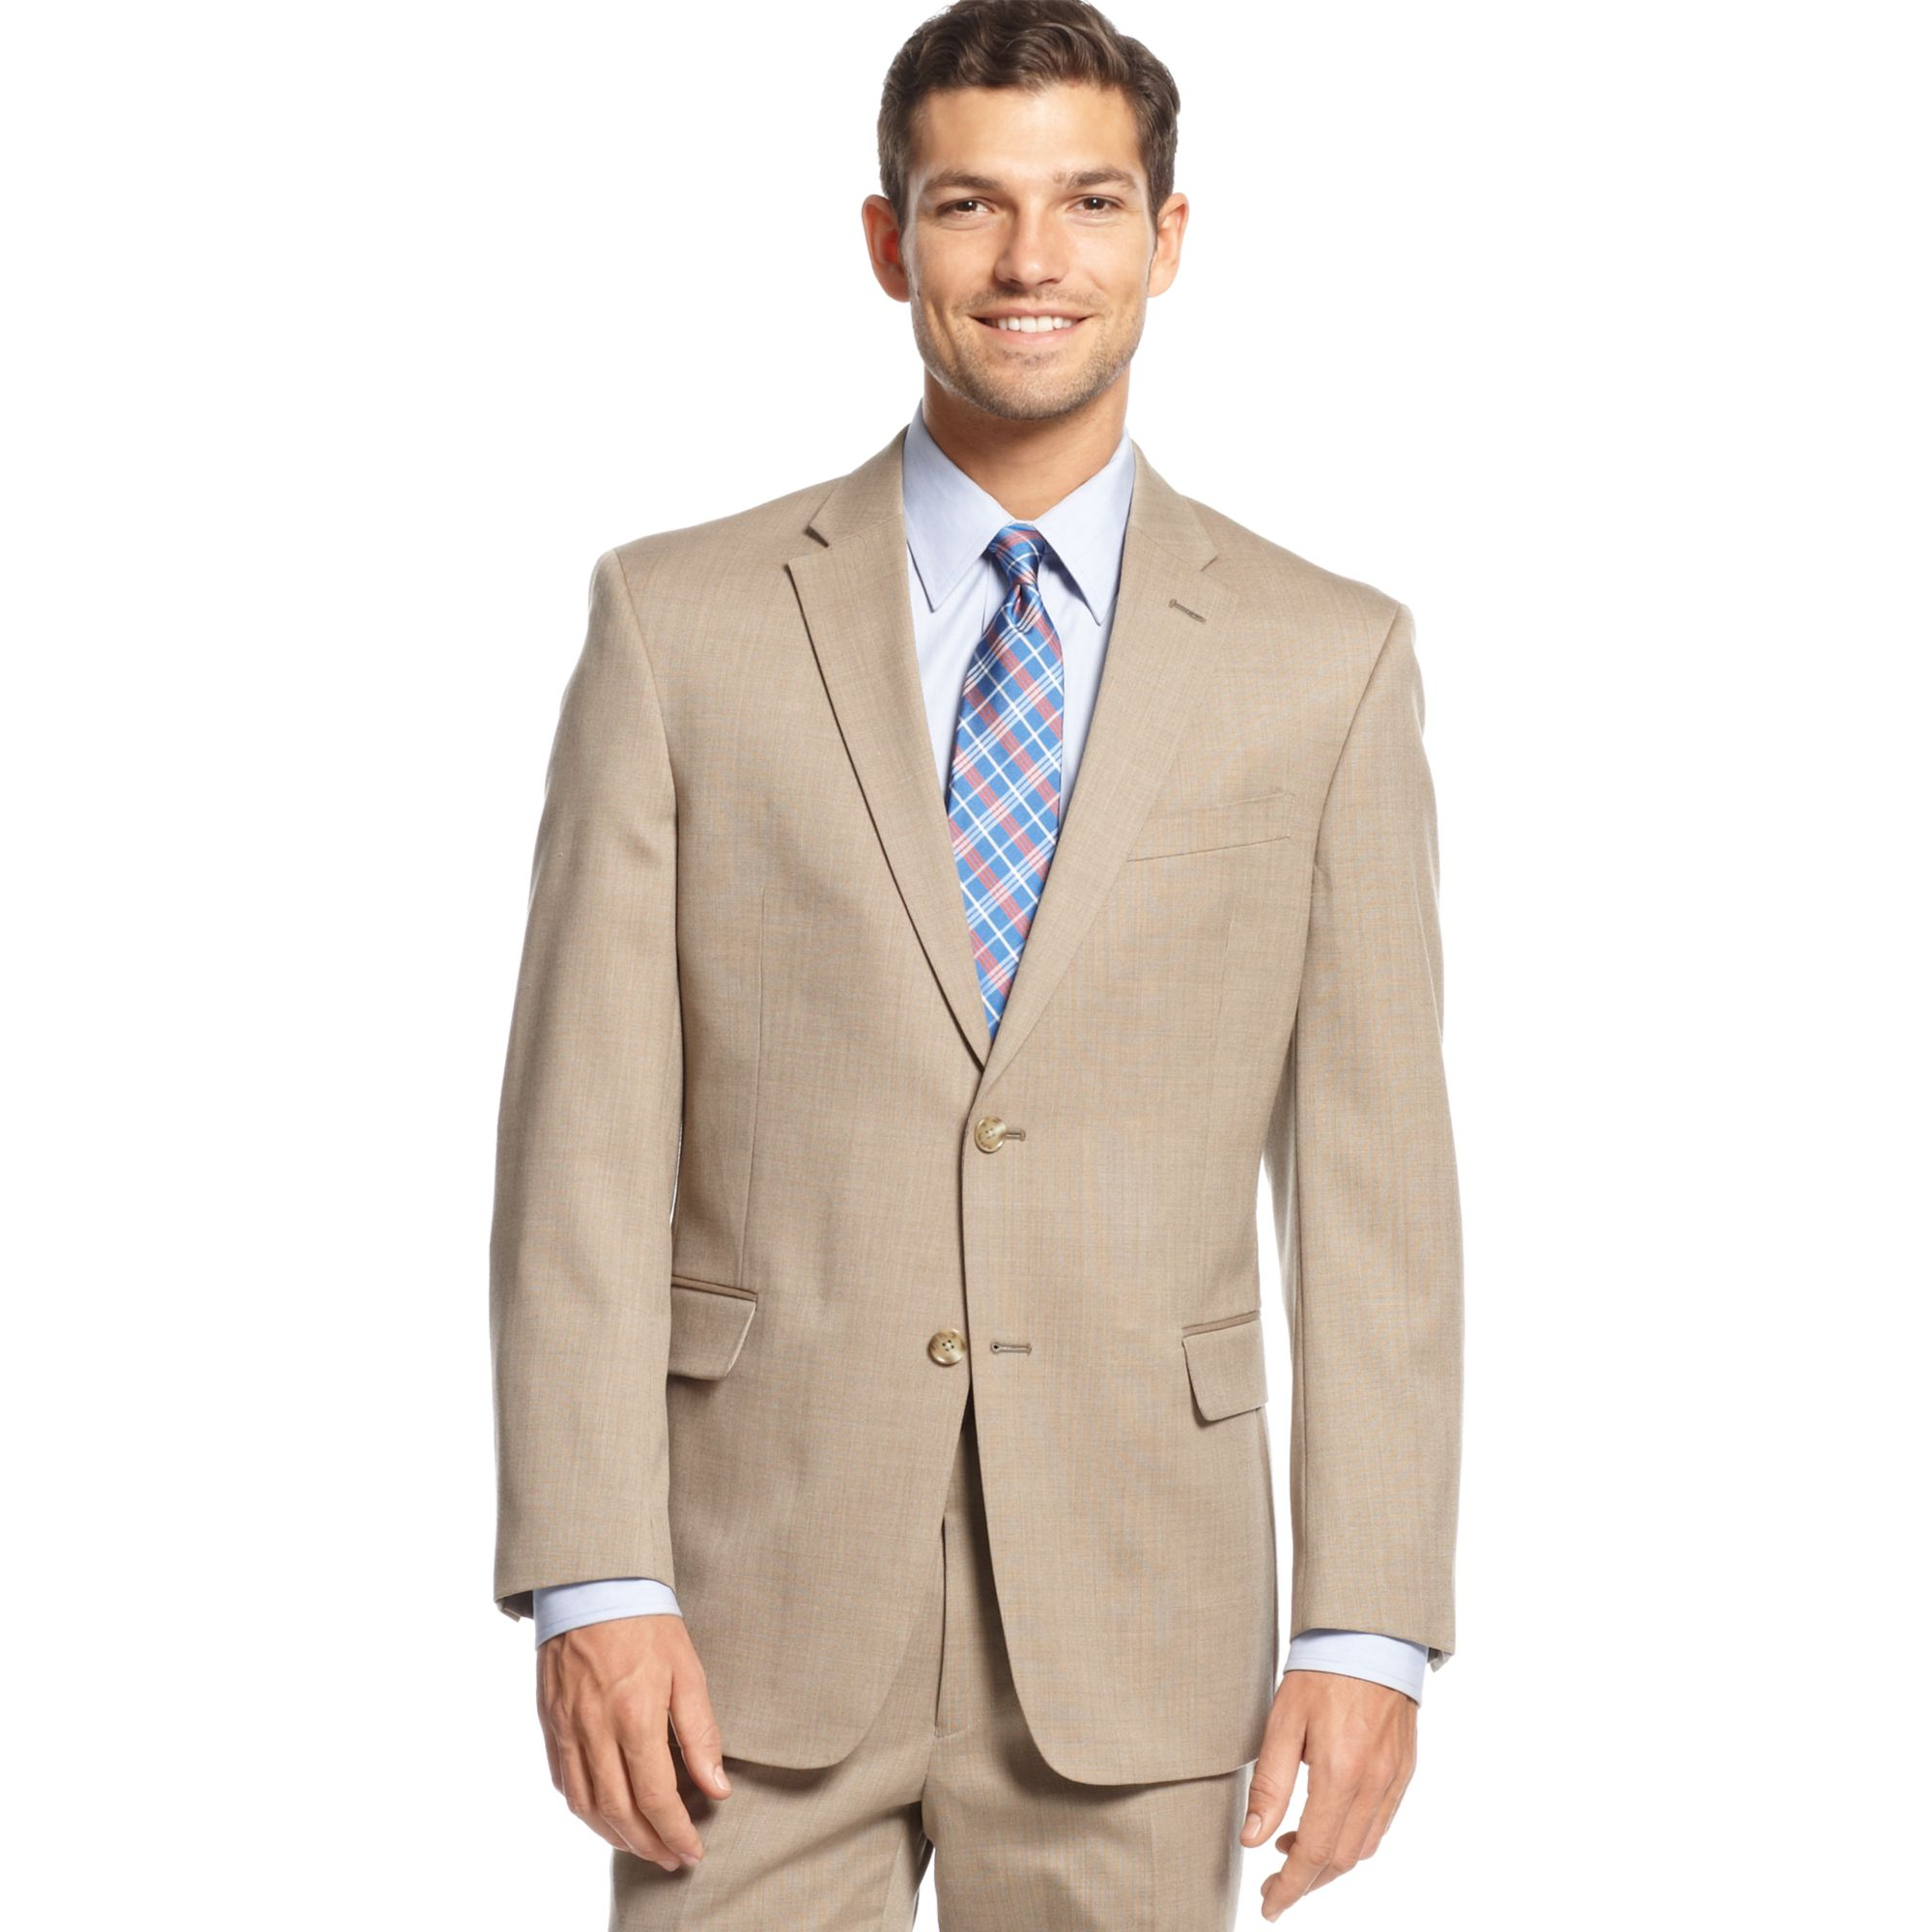 Tommy Hilfiger Tan Pindot Suit in 